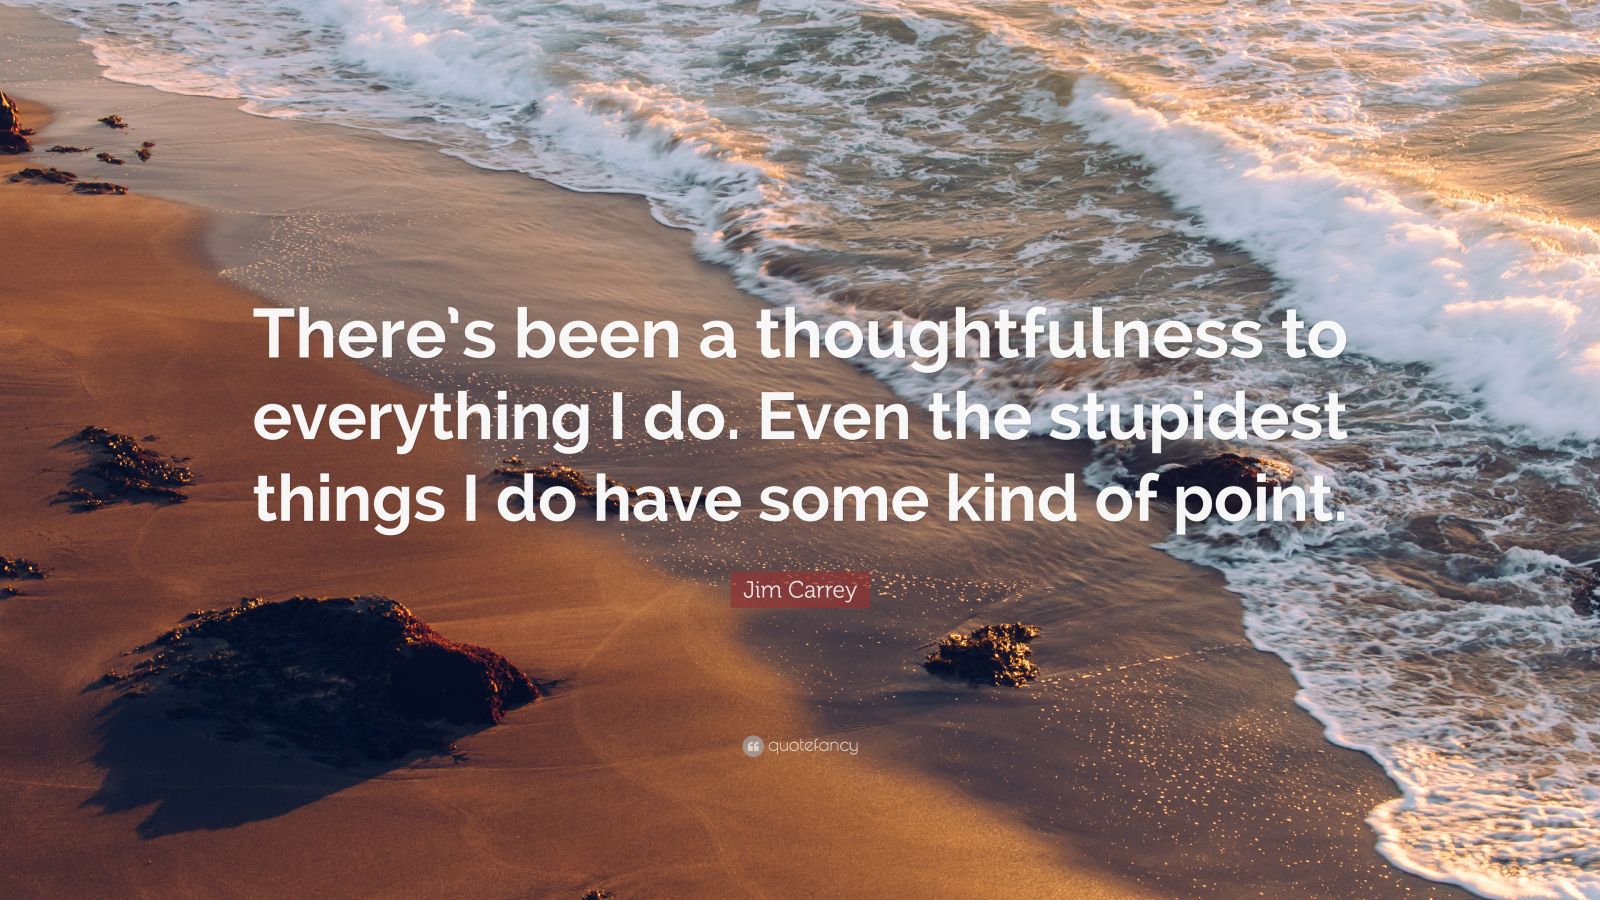 Jim Carrey Quote: “There’s been a thoughtfulness to everything I do ...